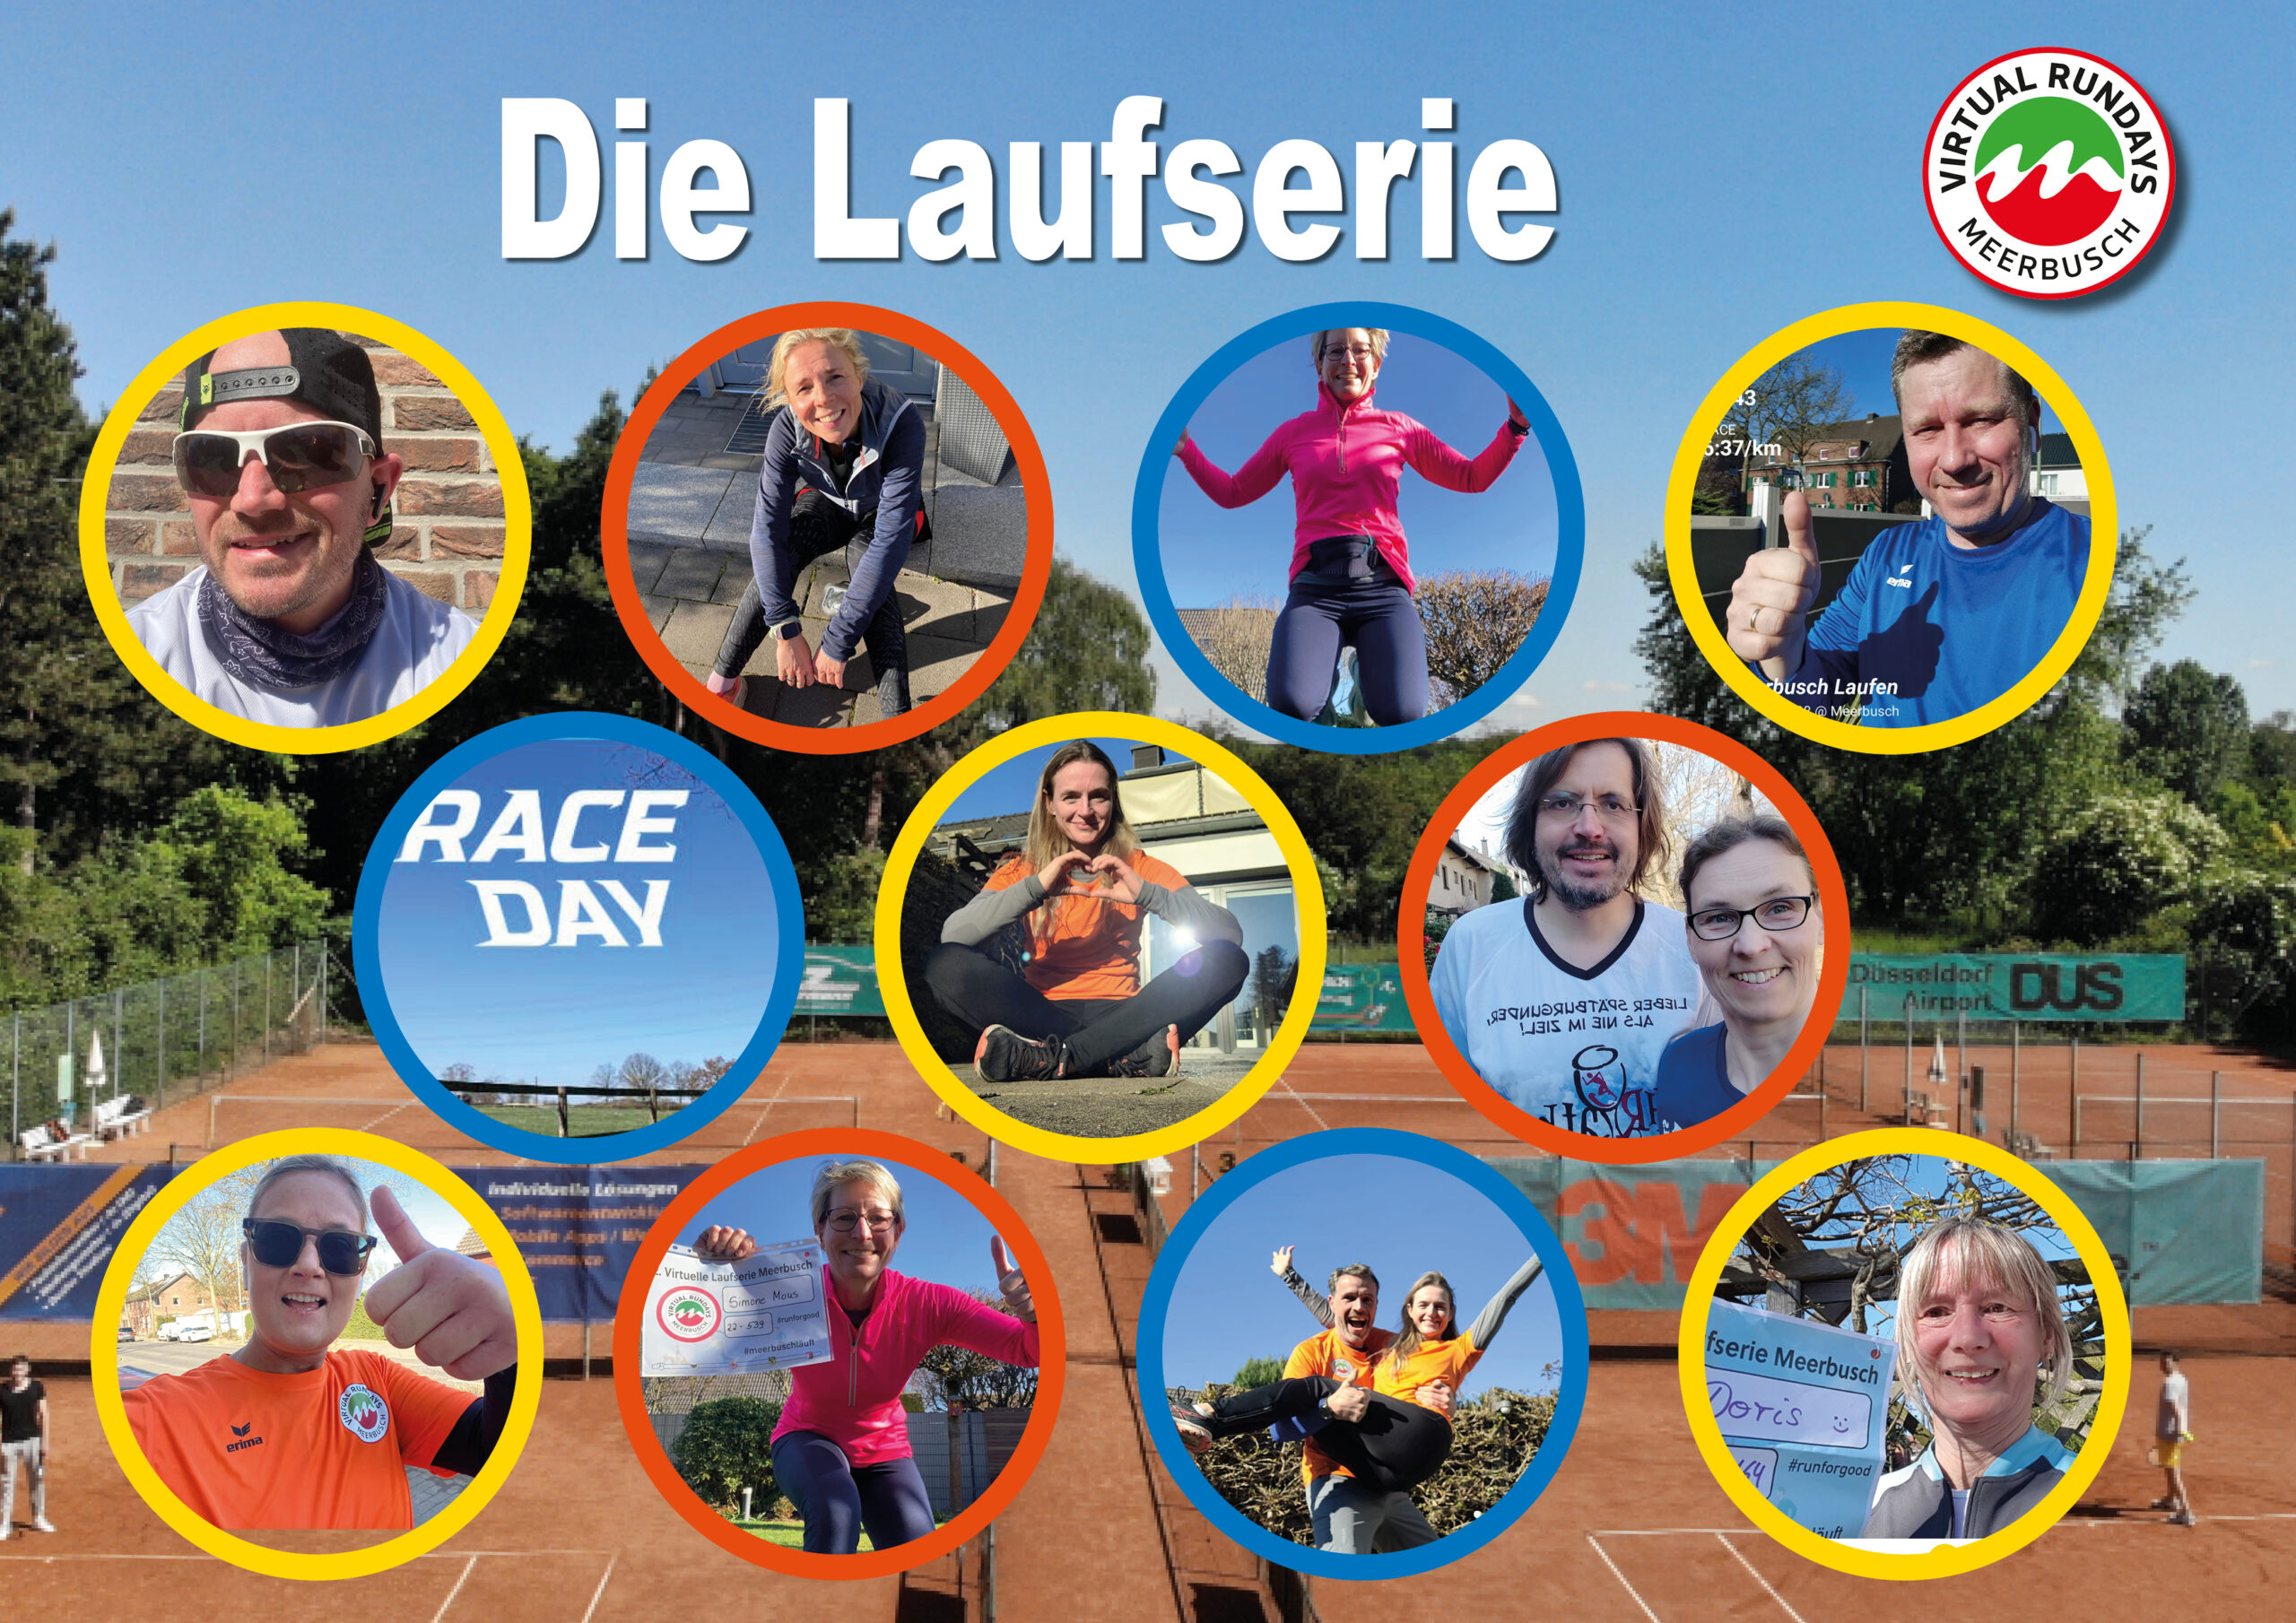 Laufserie 2 Photo Wall2